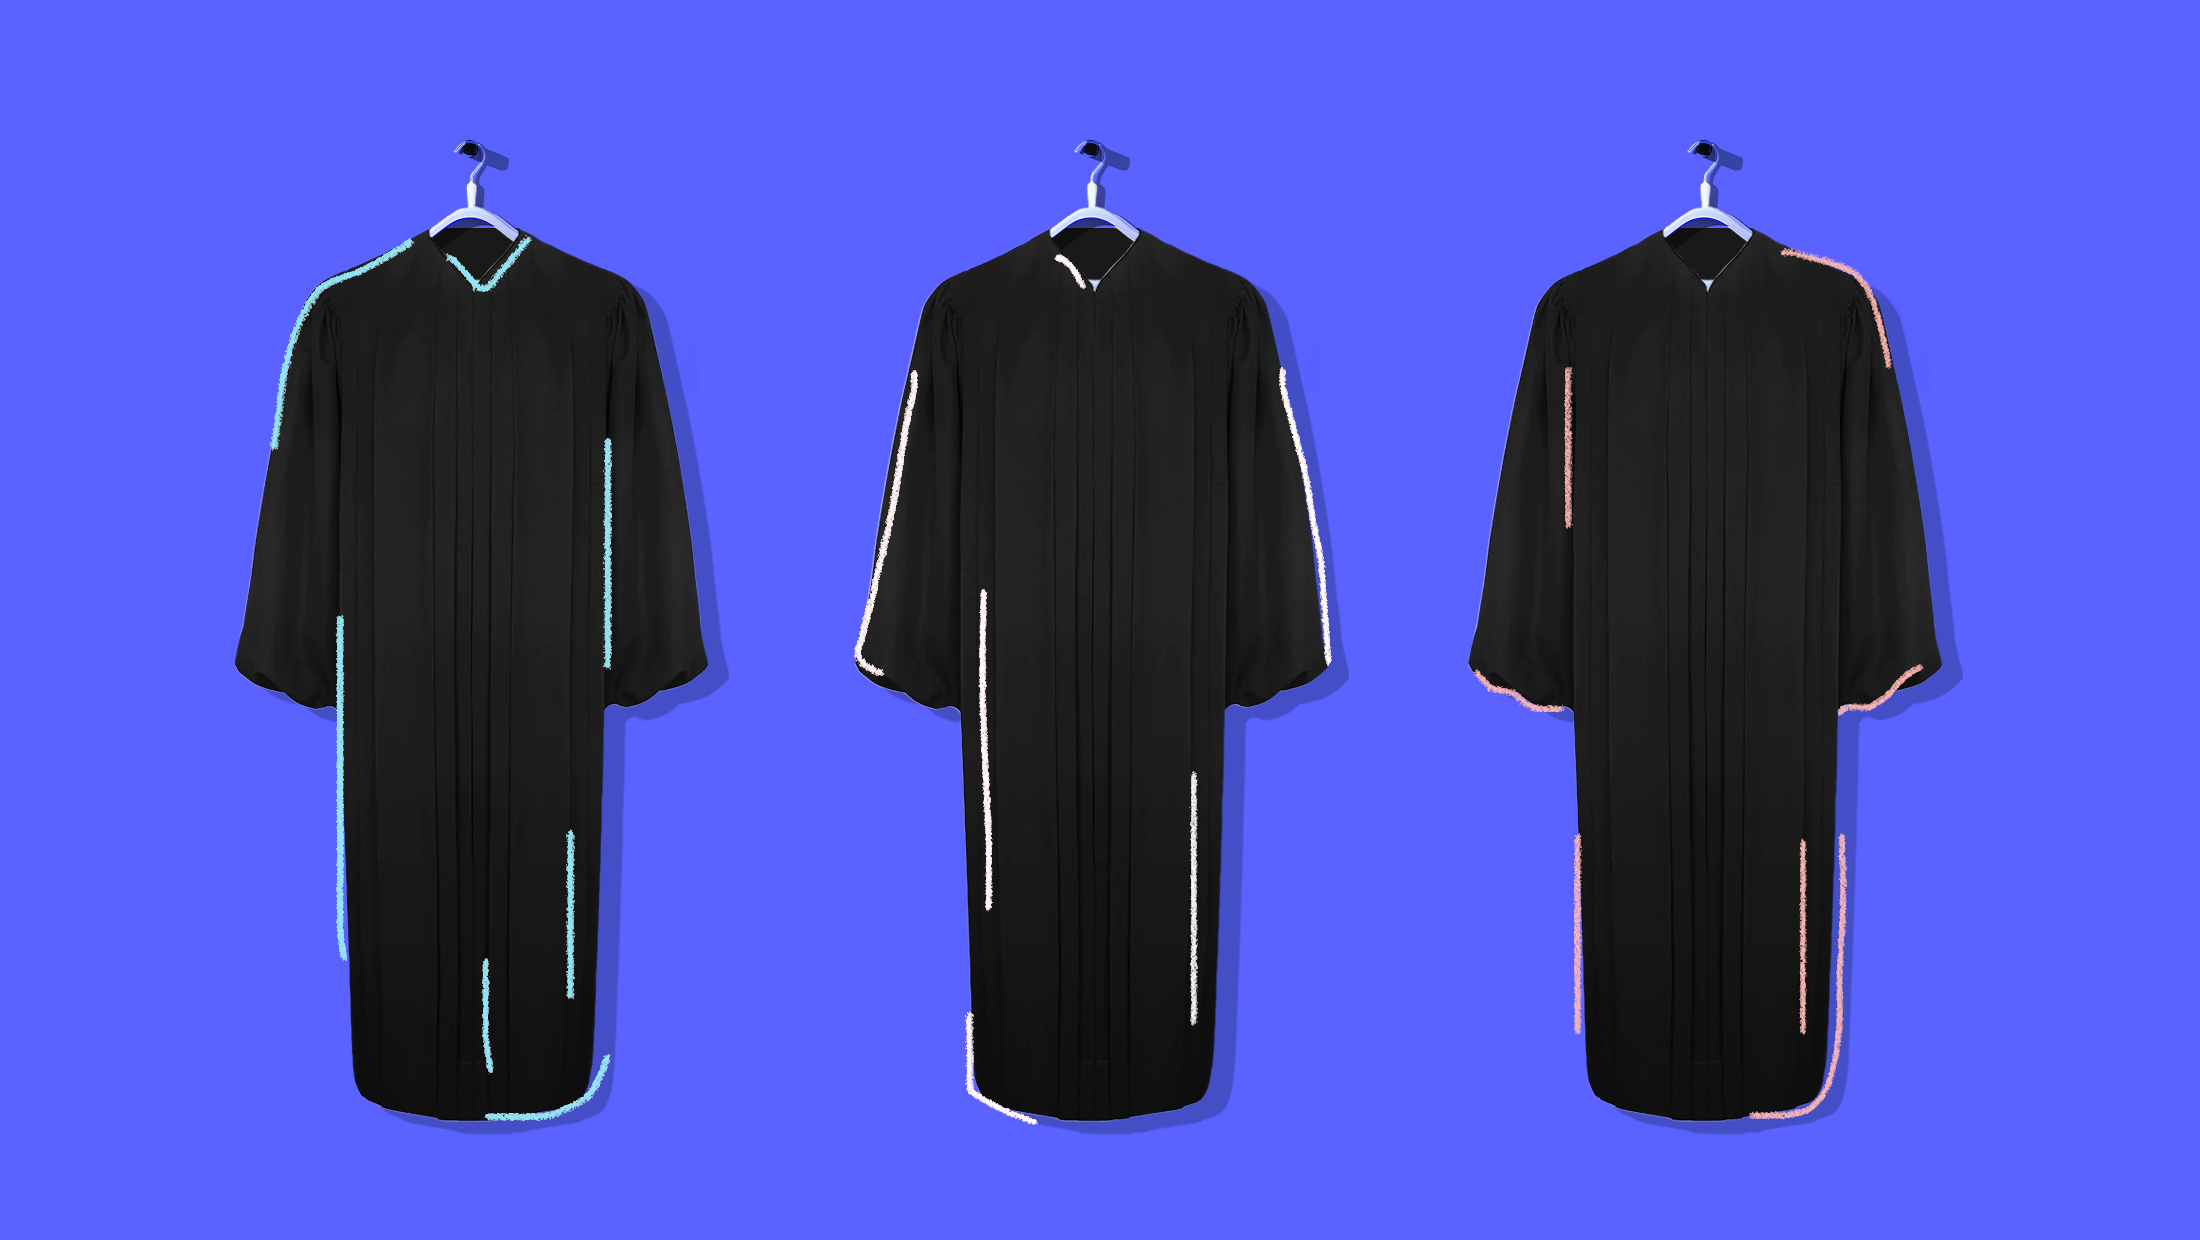 Blue background with three black-toned judicial robes.